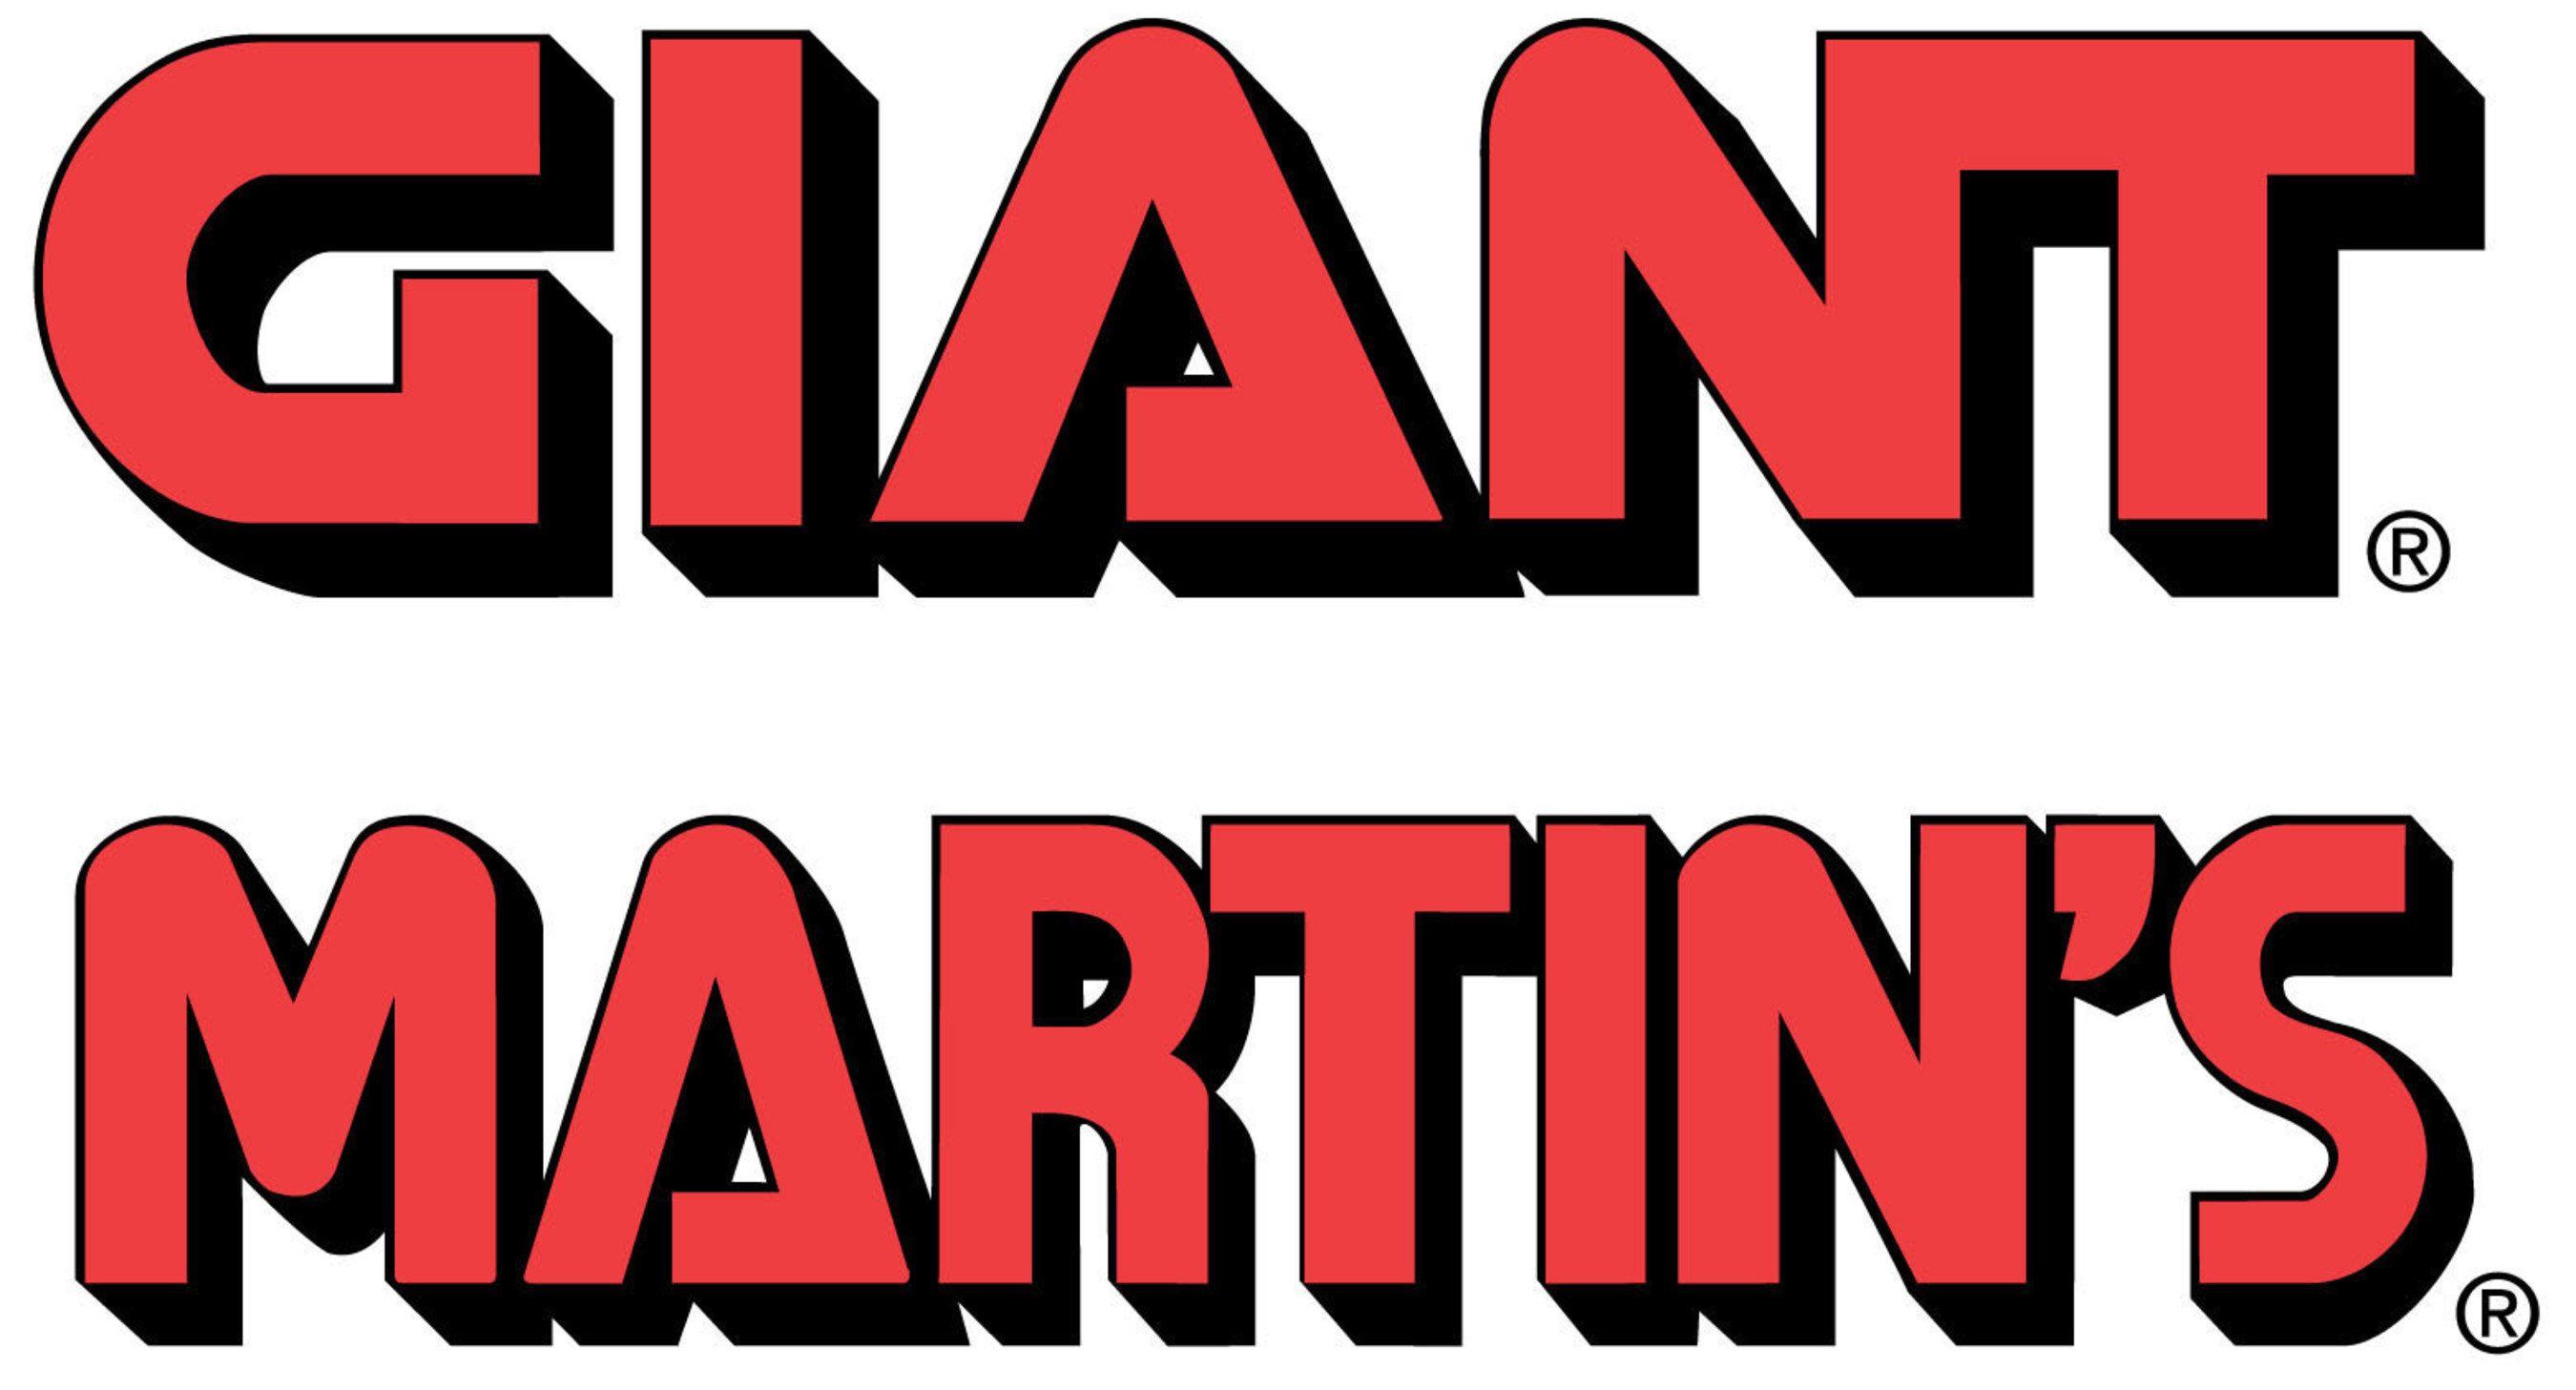 Giant Food Stores Logo - GIANT MARTIN'S Named 2015 Chain Retailer Of The Year By Grocery